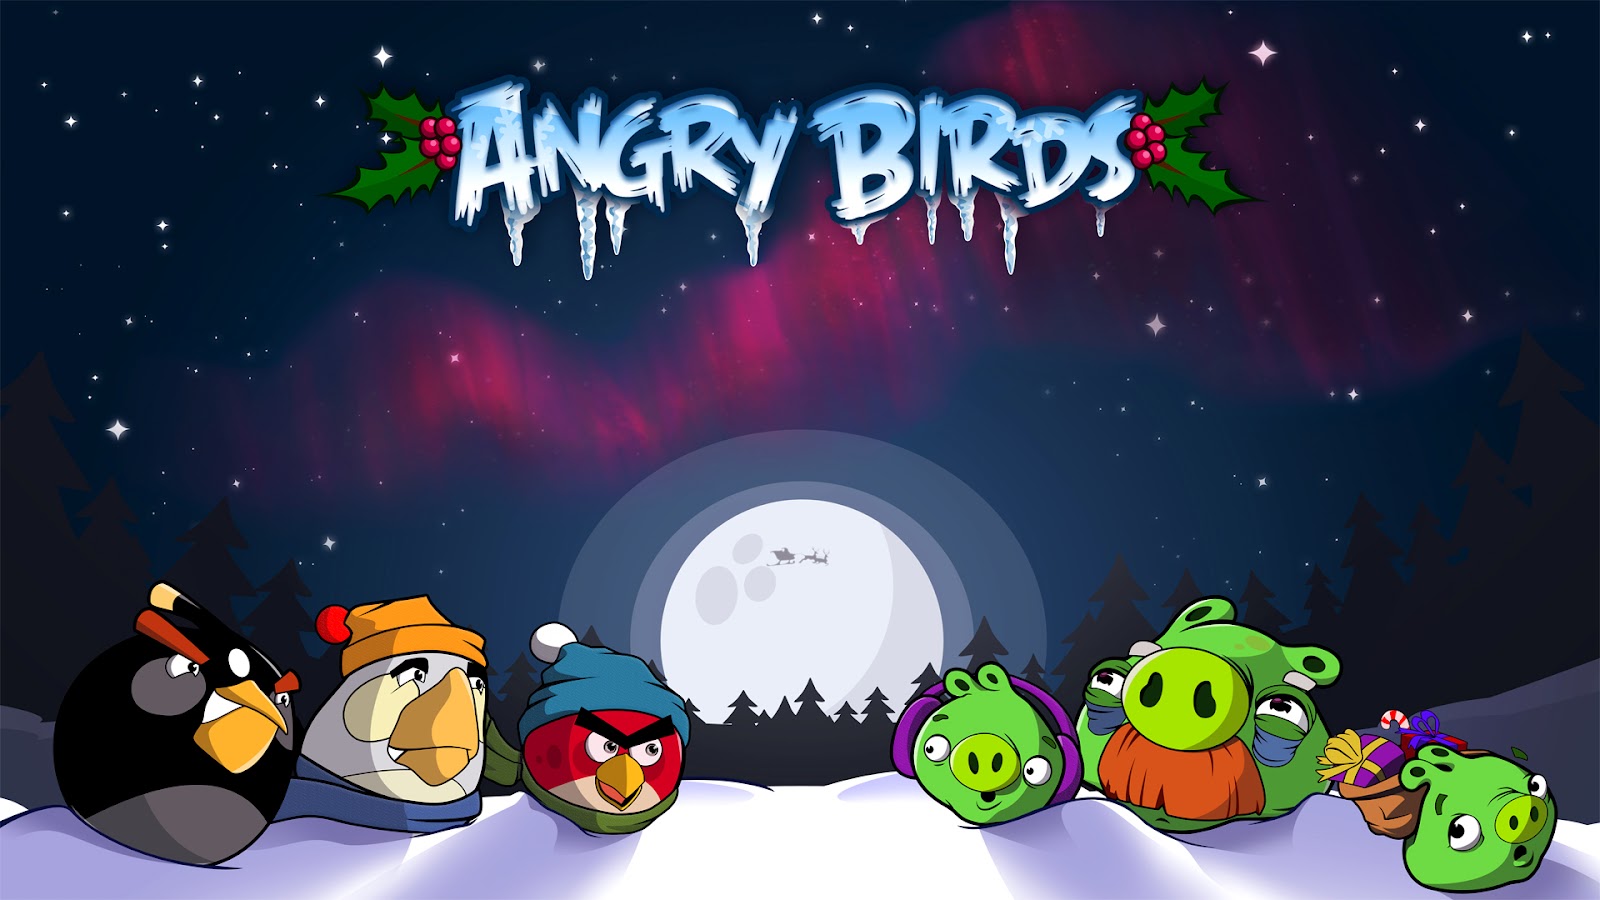 HD WALLPAPER  Angry Birds HD Wallpapers